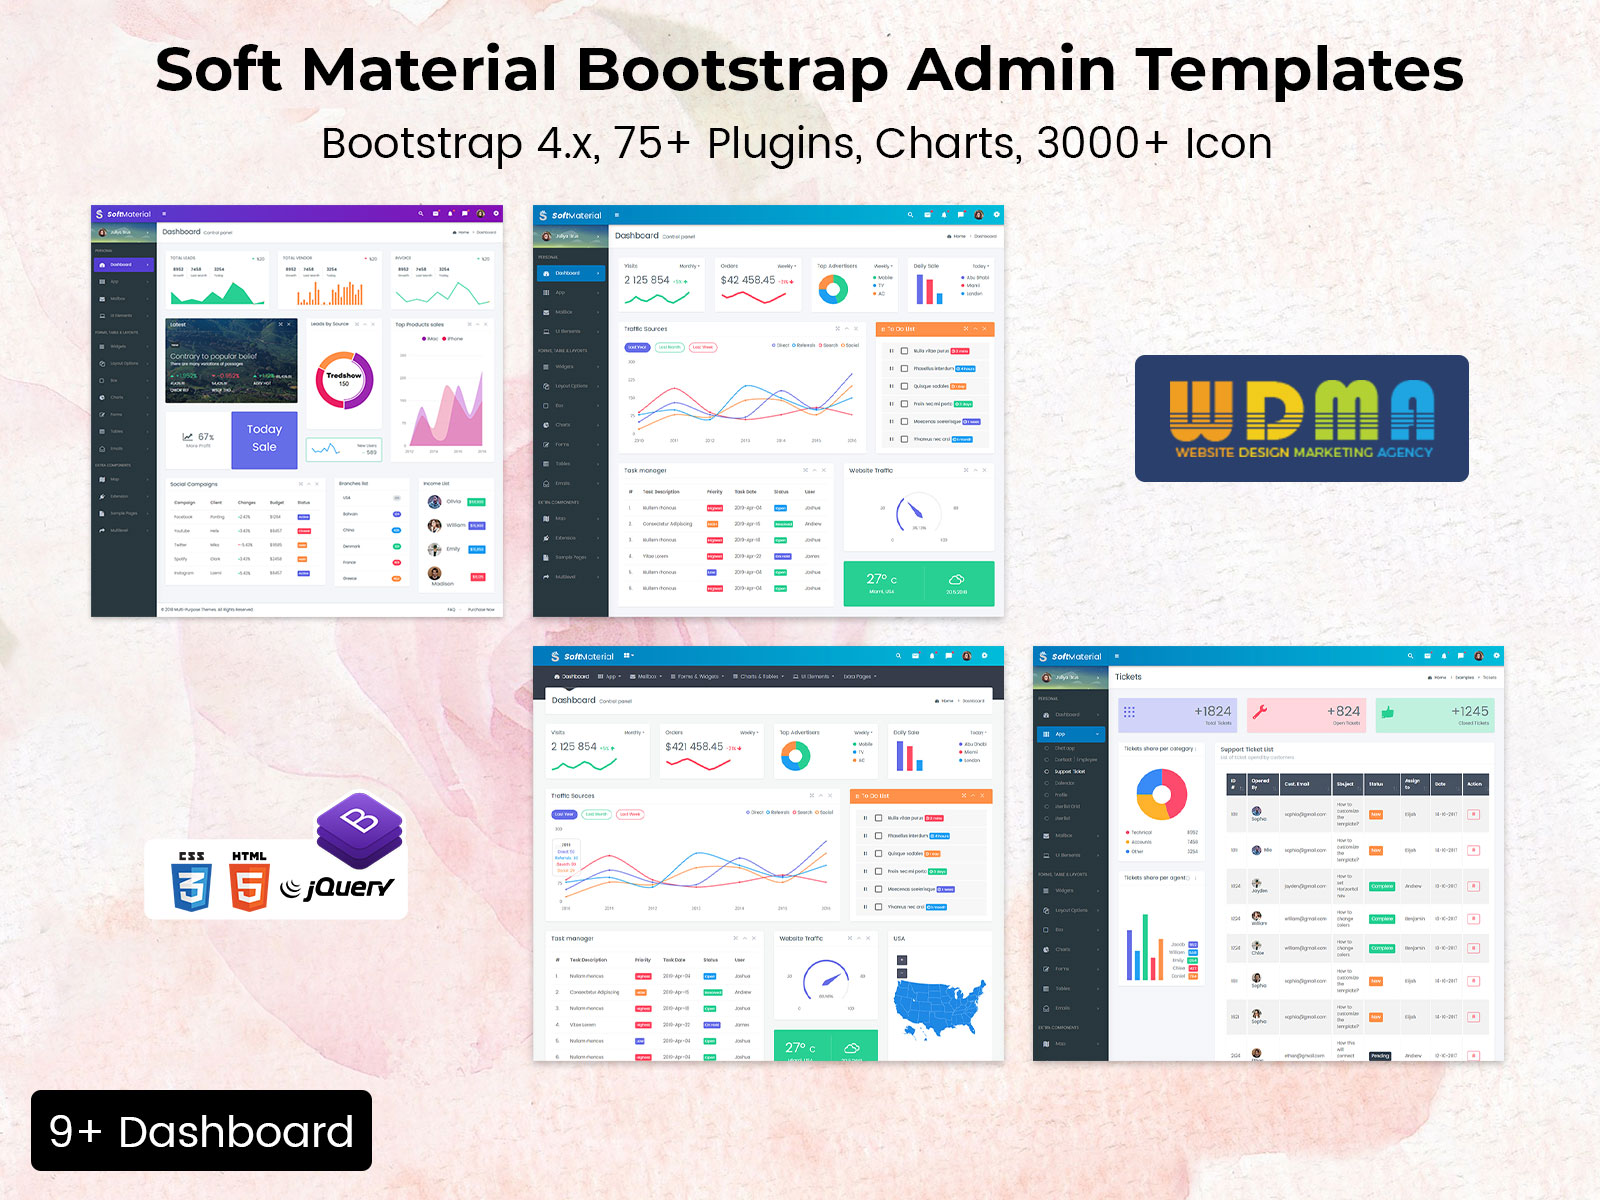 Optimizing Performance Of Soft Material: Bootstrap Admin Web App